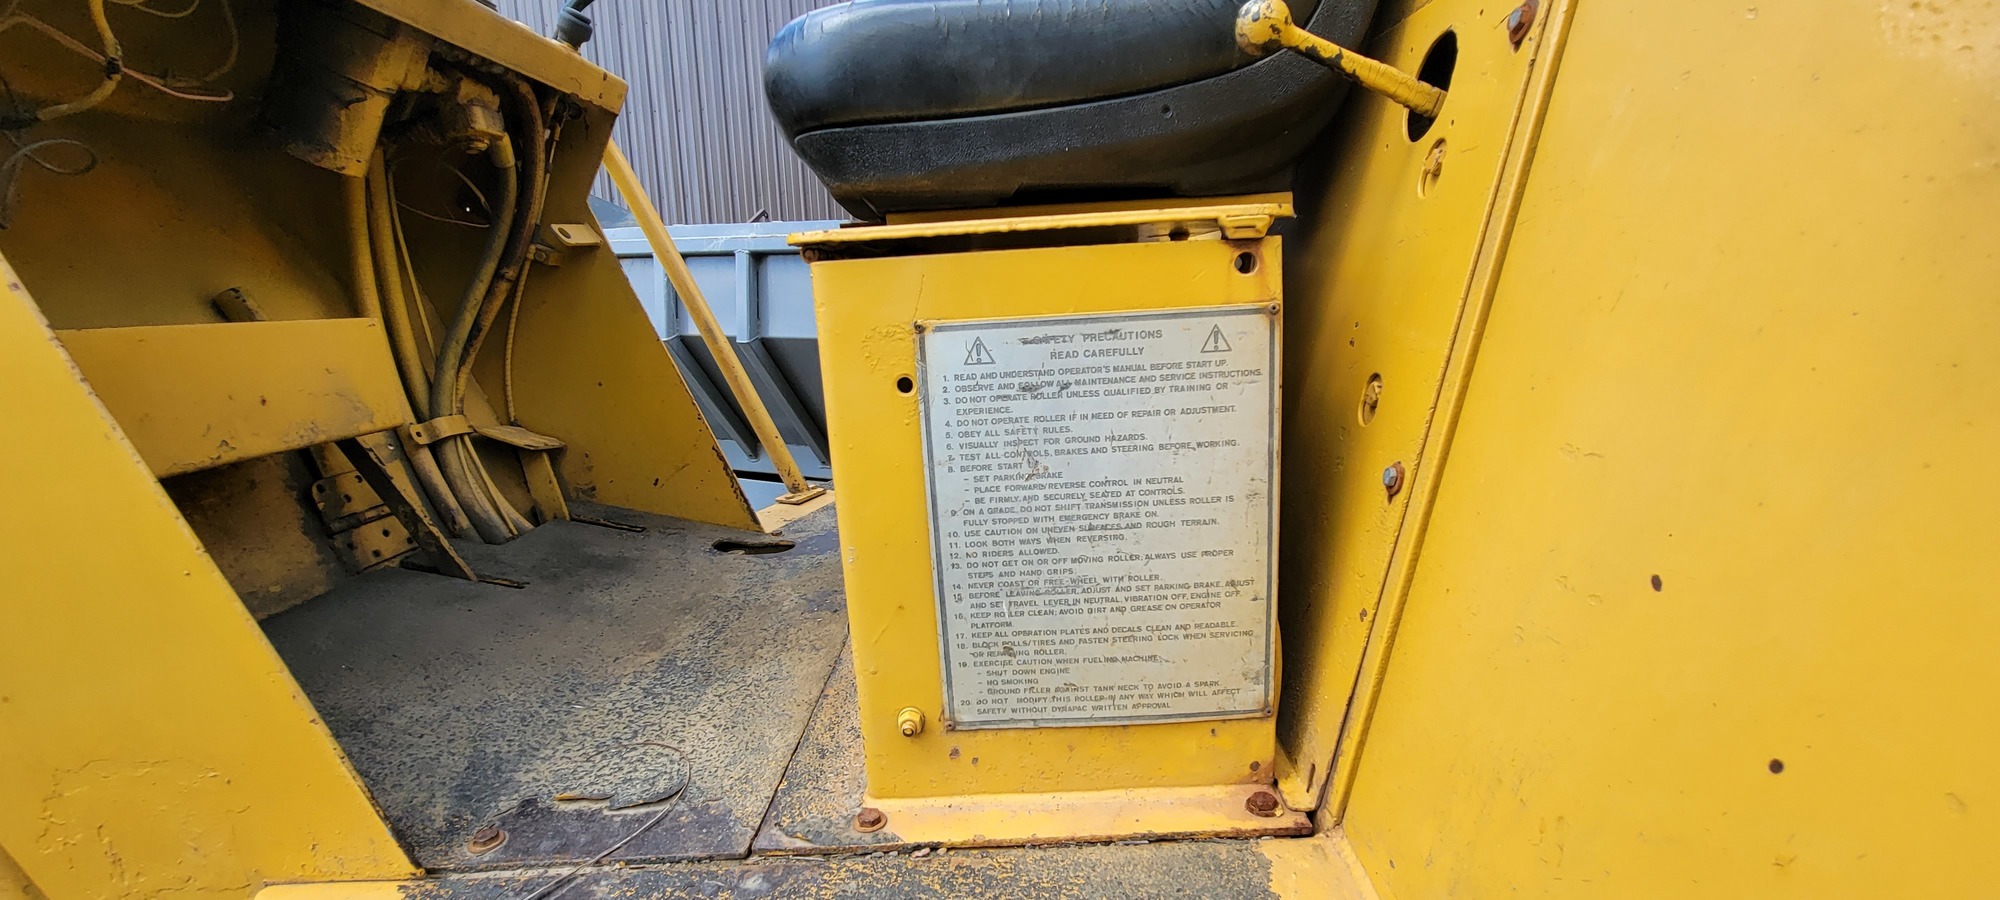 DYNA PAC CA 15PD COMPACTOR  | Iron Listing